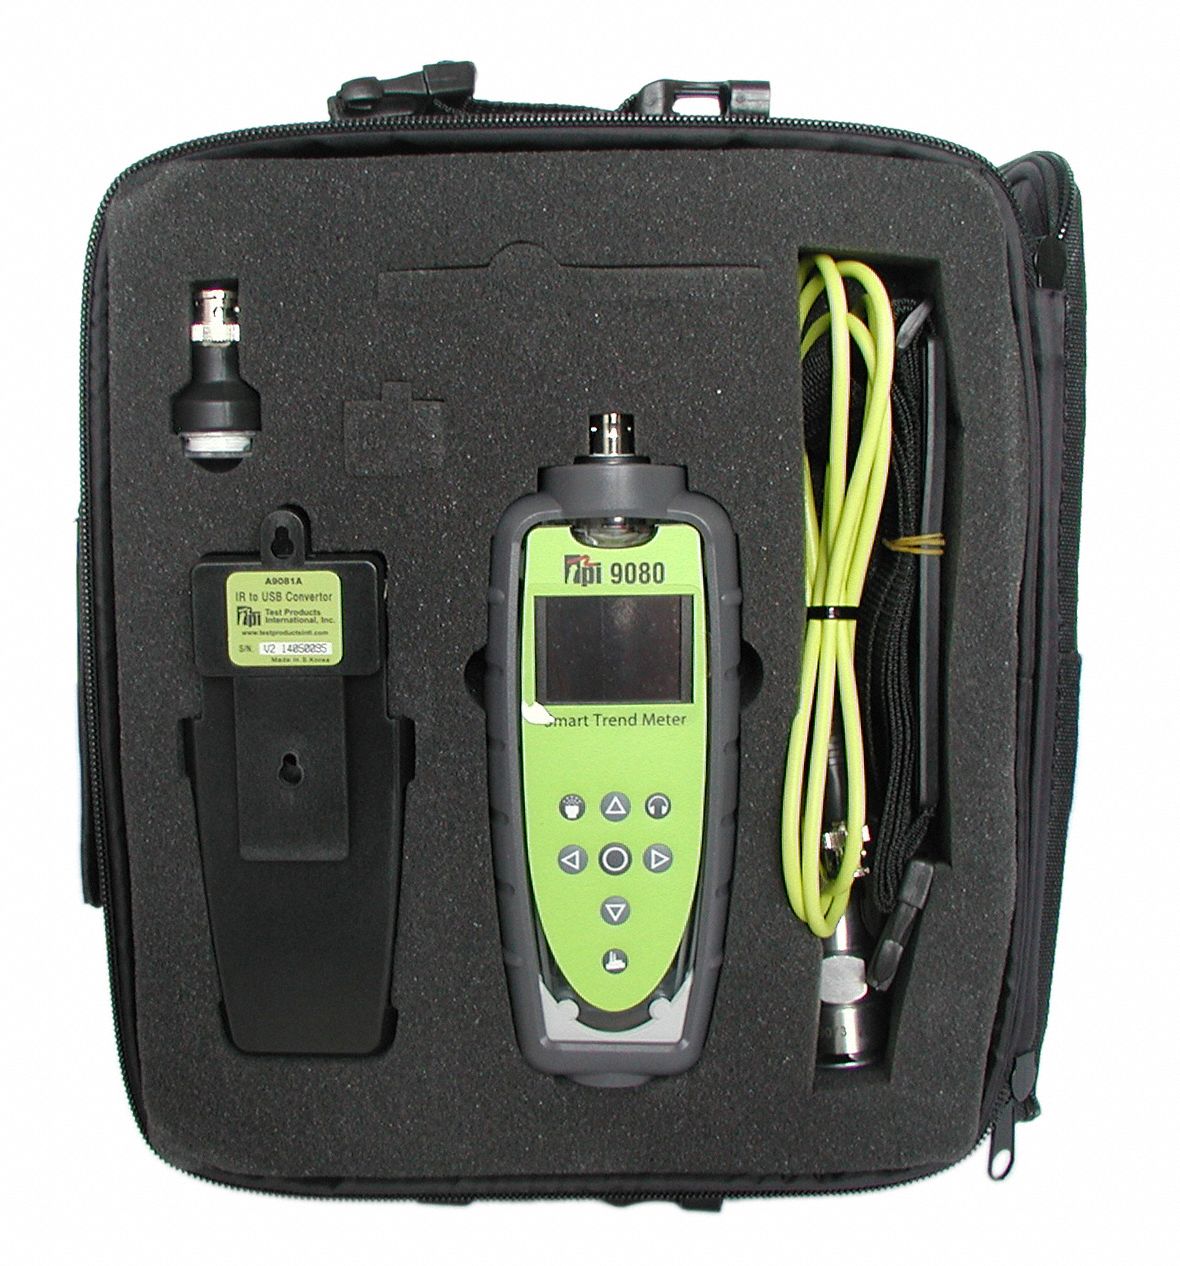 Vibration Meter w/Vib Trend Software: With Cal. Cert., 0 to 50g, 393.6in/s/9999mm/s